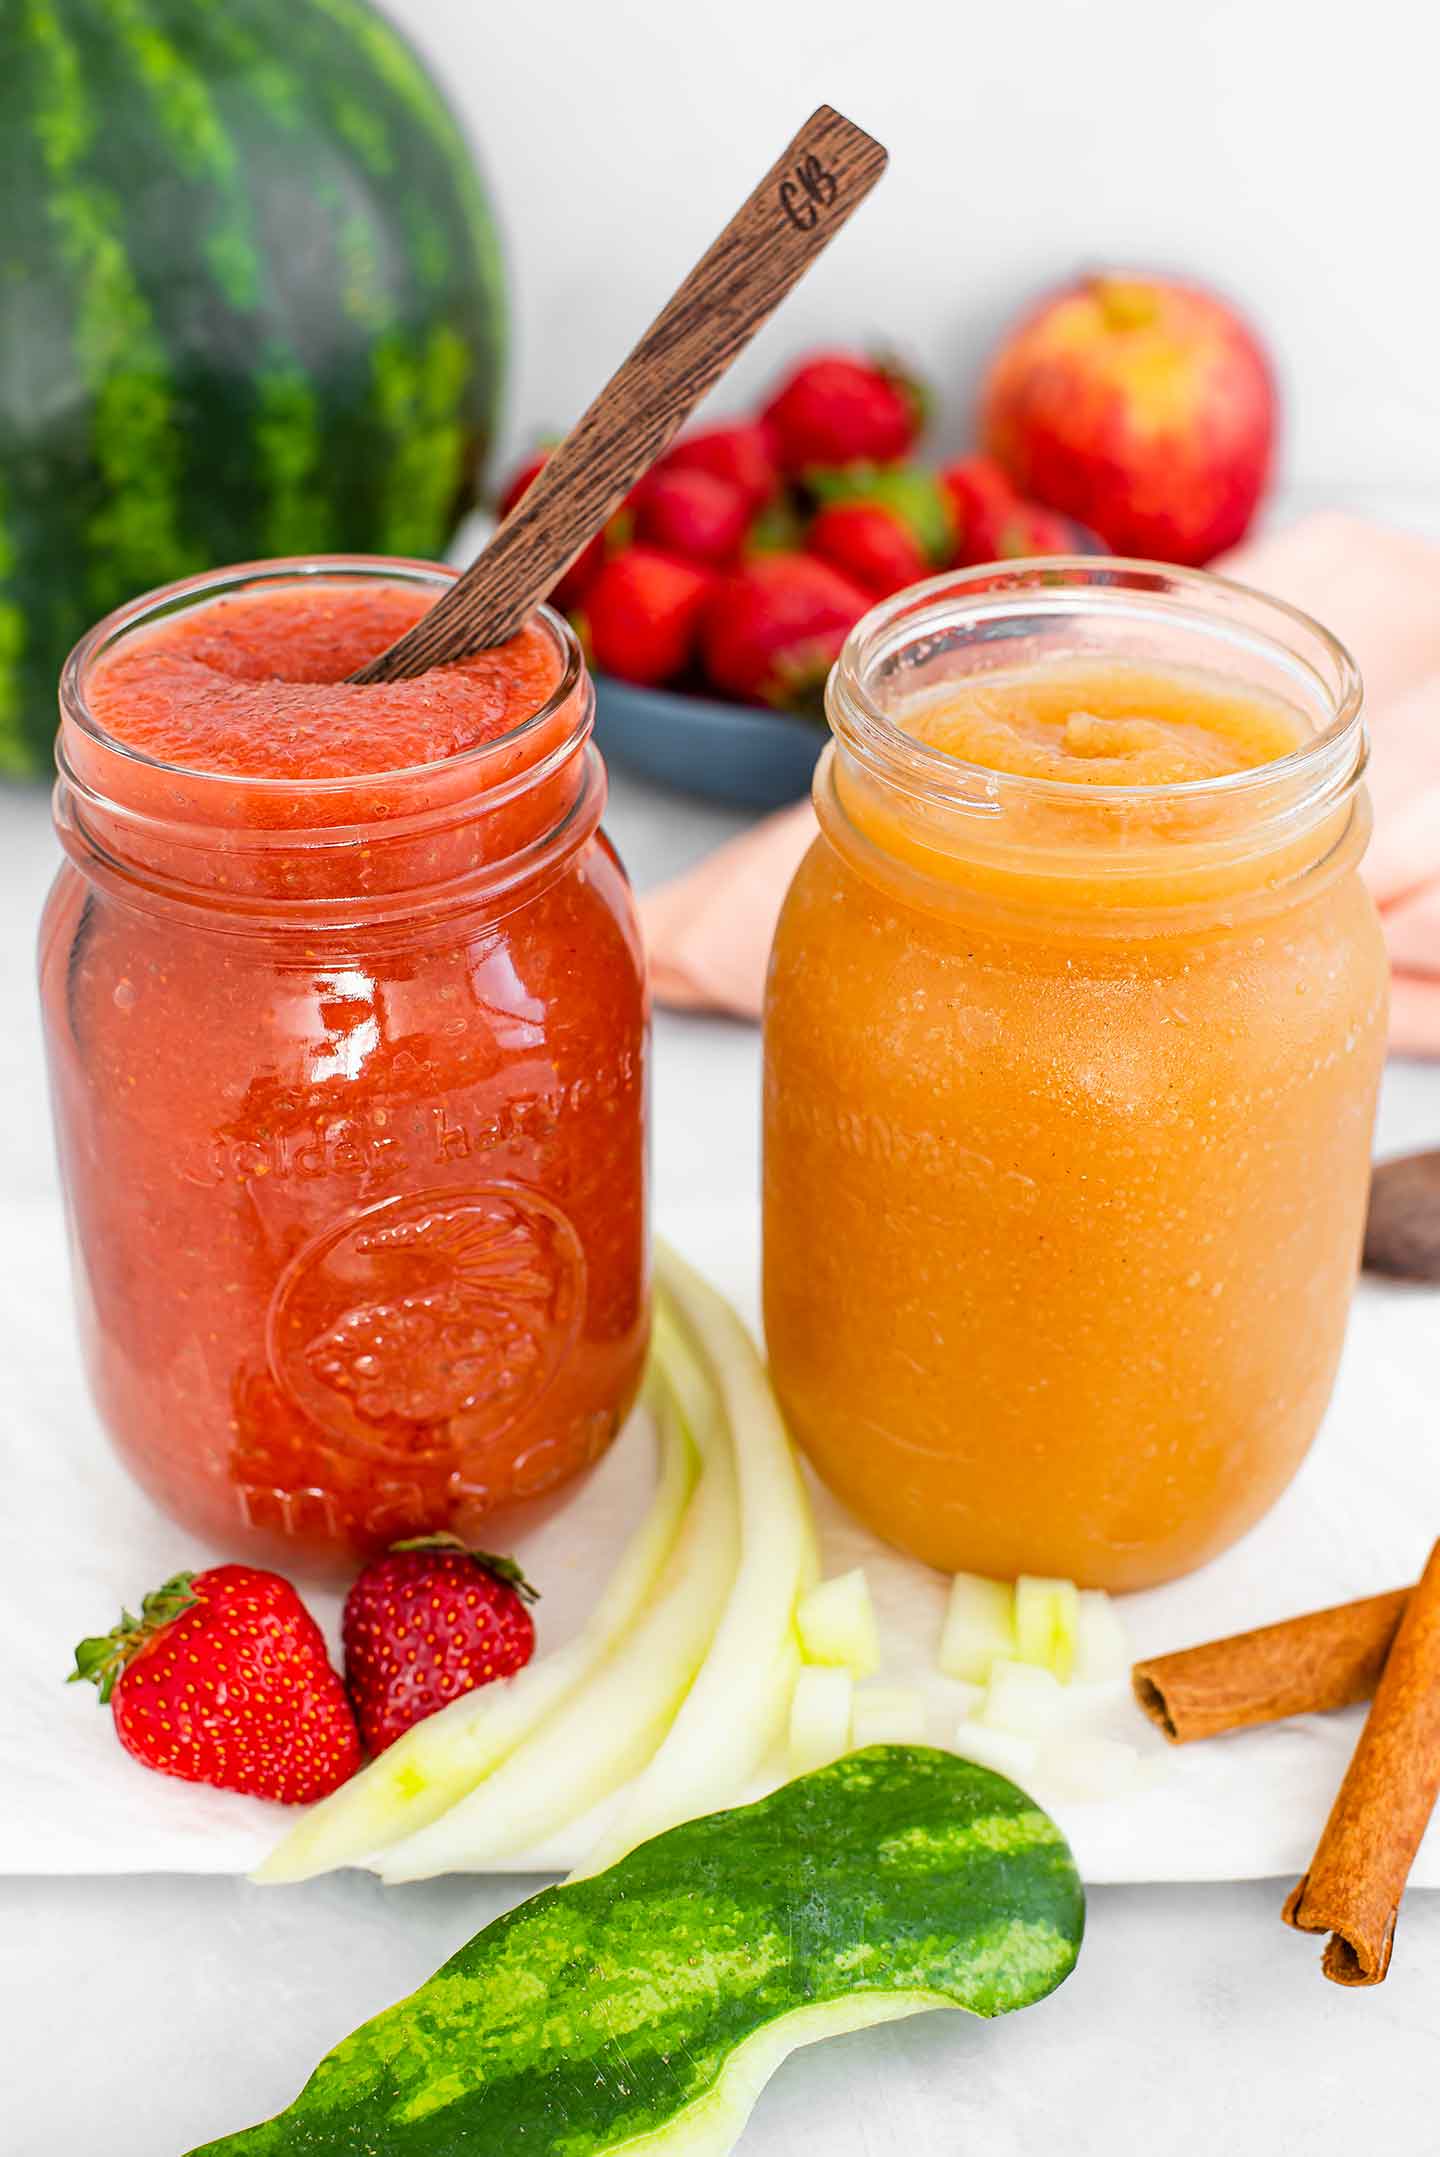 Side view of two jars of watermelon rind fruit sauce. A wooden spoon dips into a strawberry sauce and cinnamon sticks and an apple surround the golden watermelon applesauce.